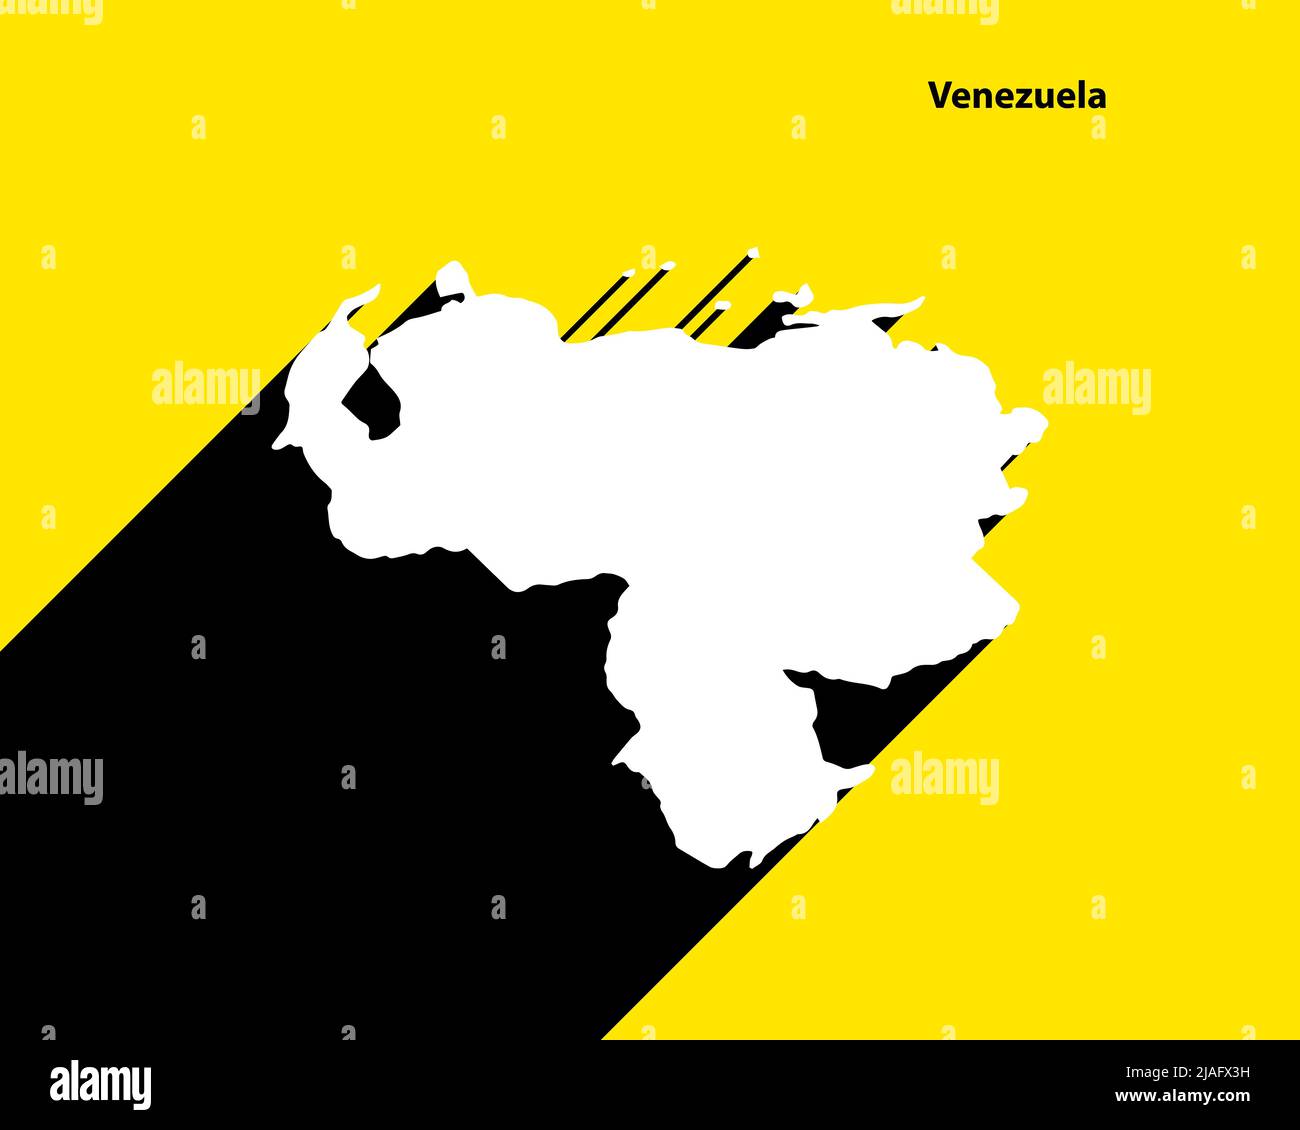 Venezuela Map on retro poster with long shadow. Vintage sign easy to edit, manipulate, resize or colourise. Stock Vector